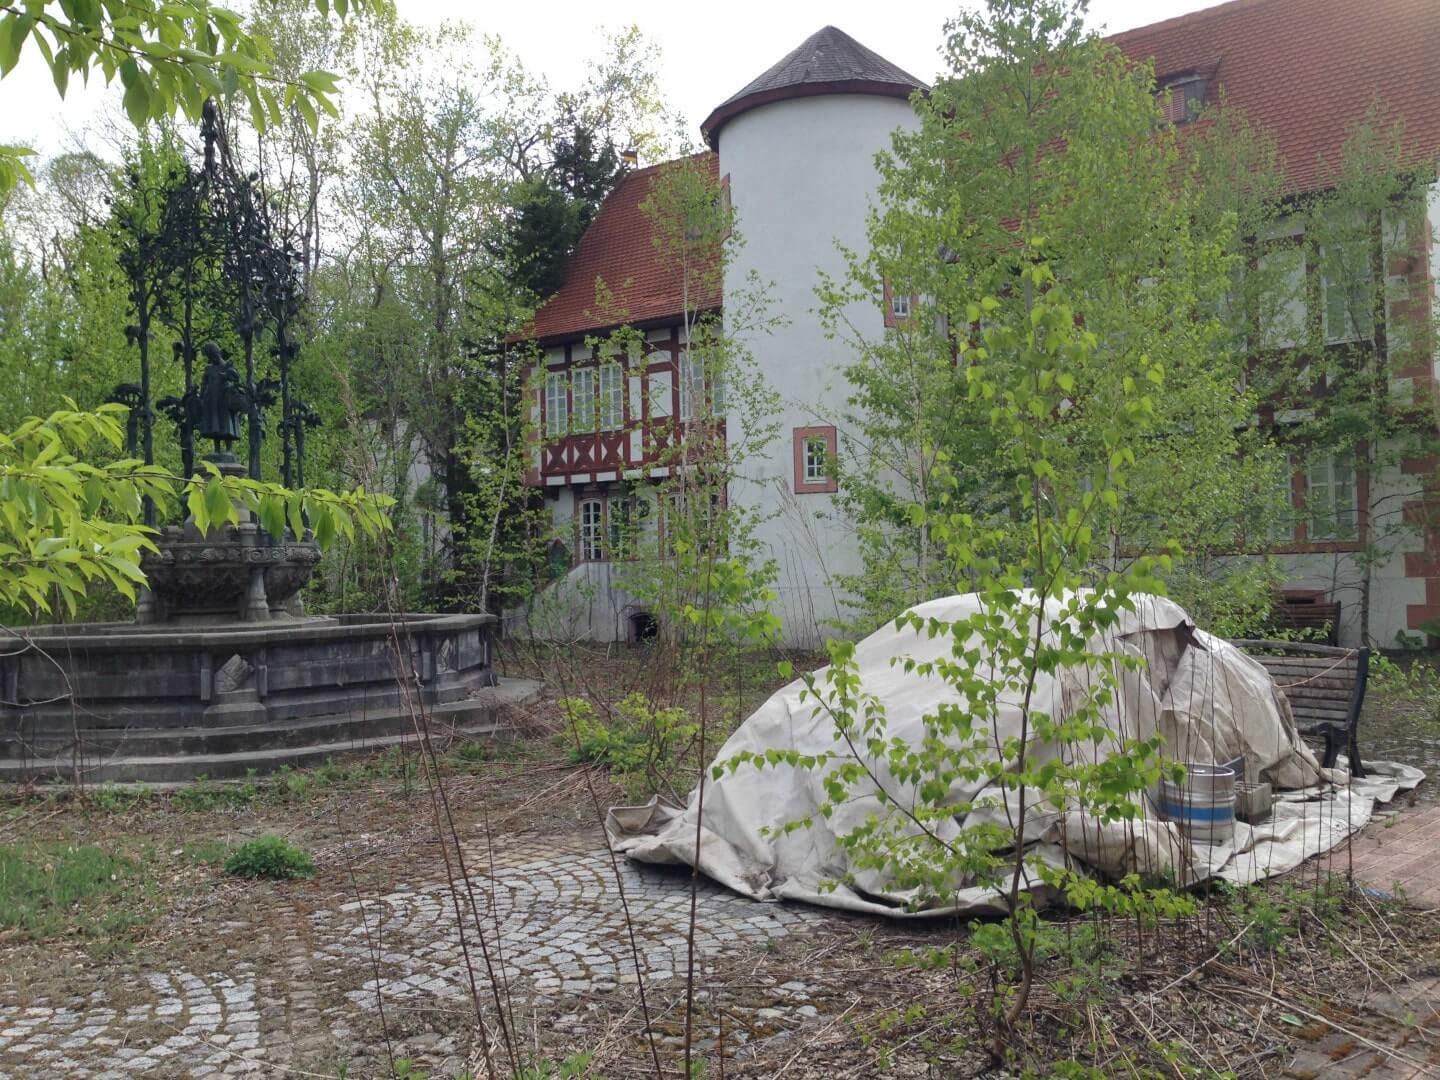 overgrown courtyard with a car covered with tarp